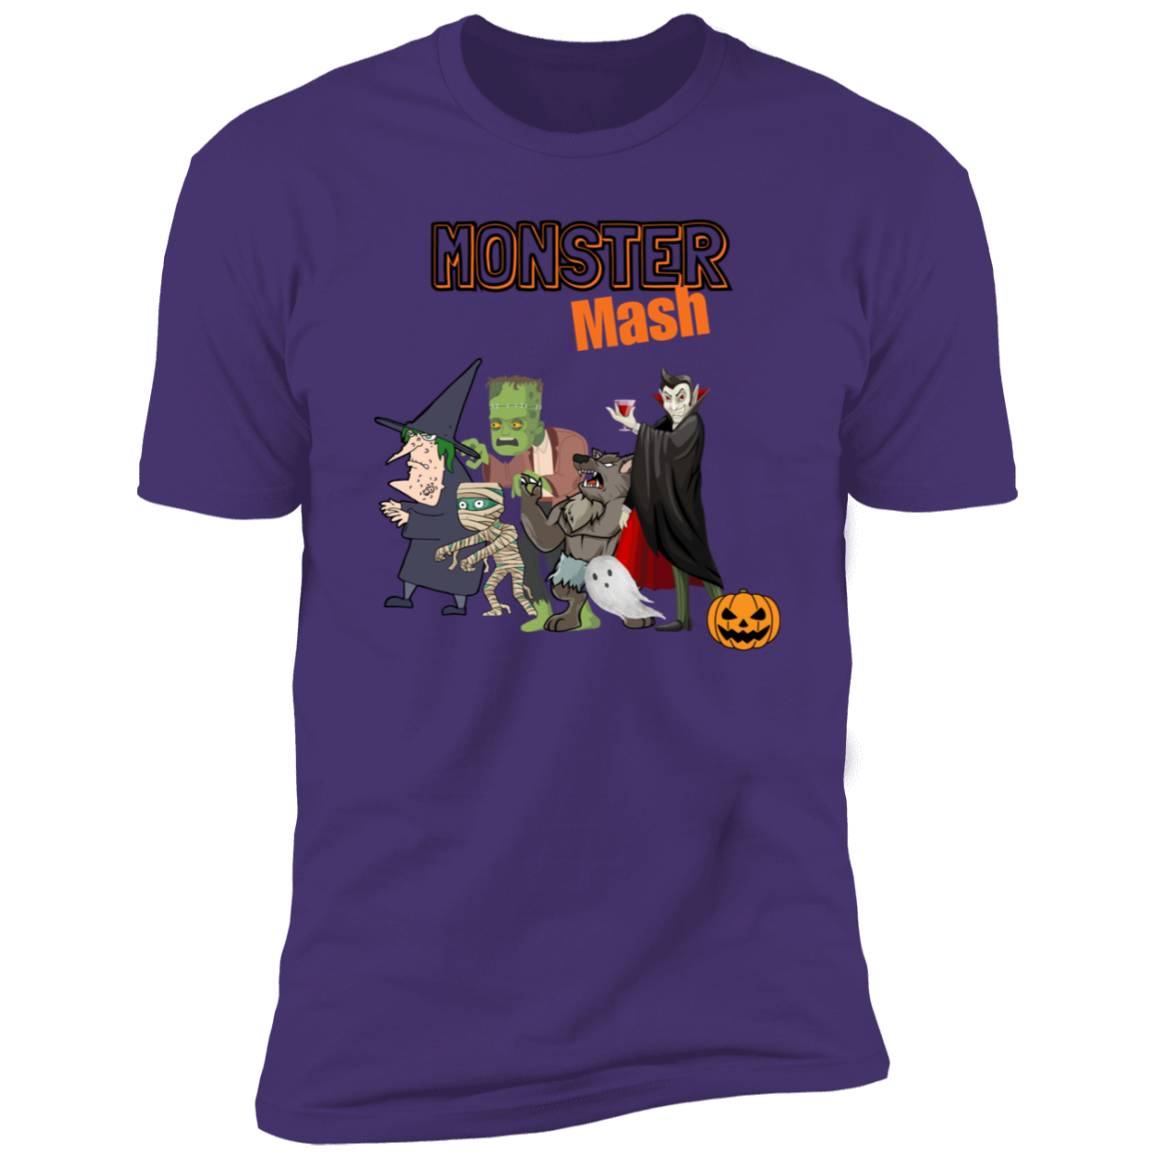 Get trendy with MONSTER Mash t shirt - T-Shirts available at Good Gift Company. Grab yours for $17.95 today!